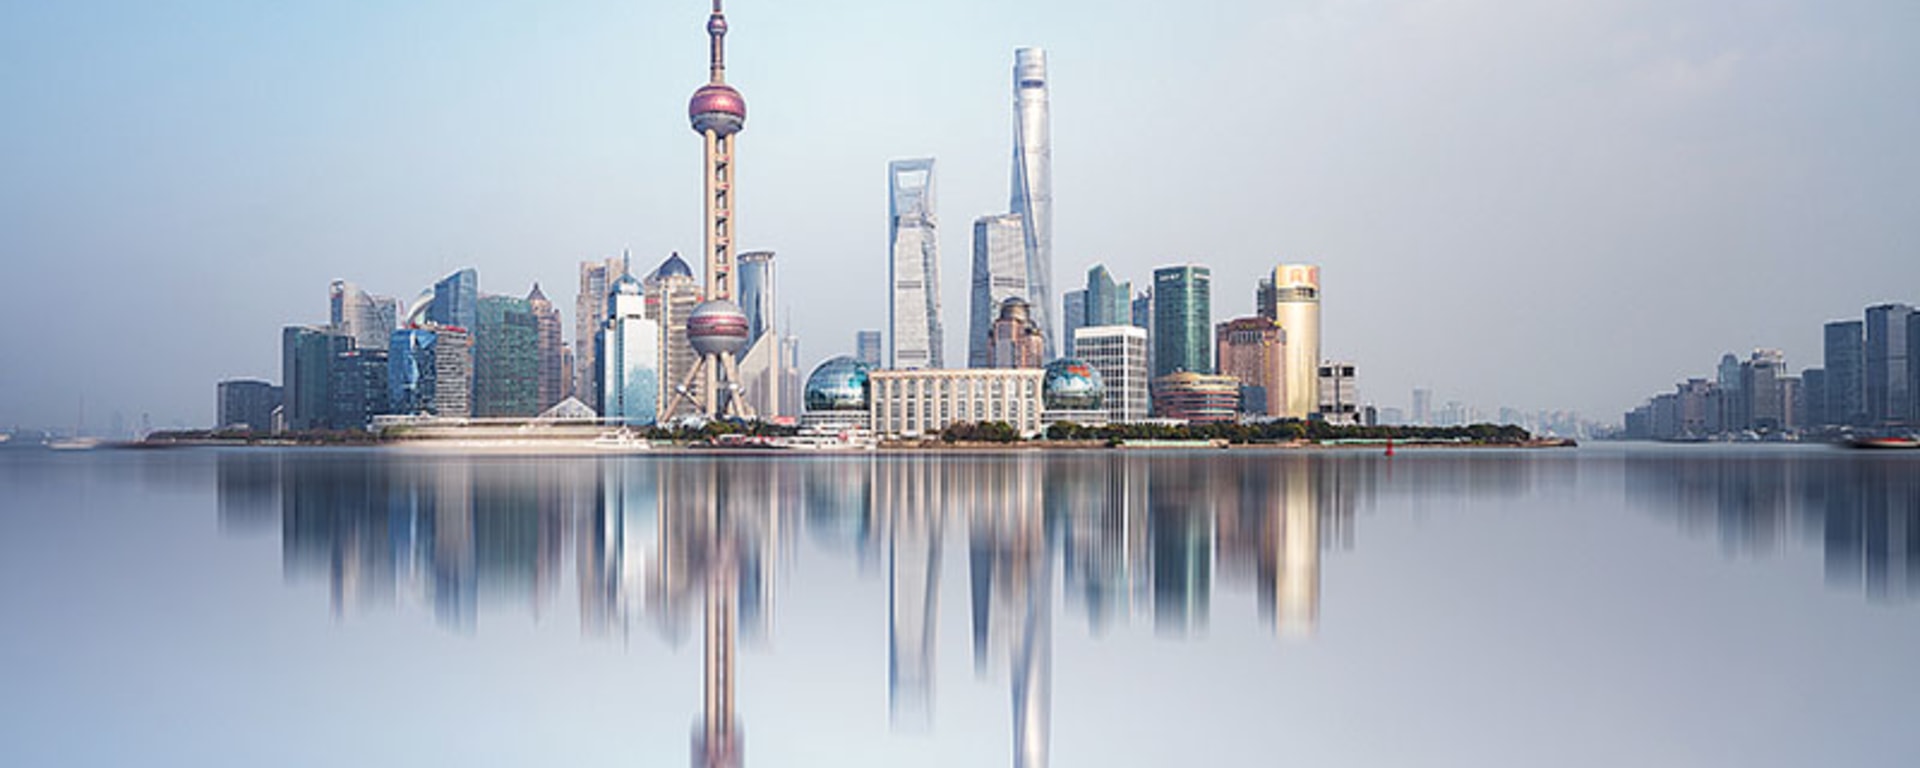 investing-in-china_teaser_800x450px